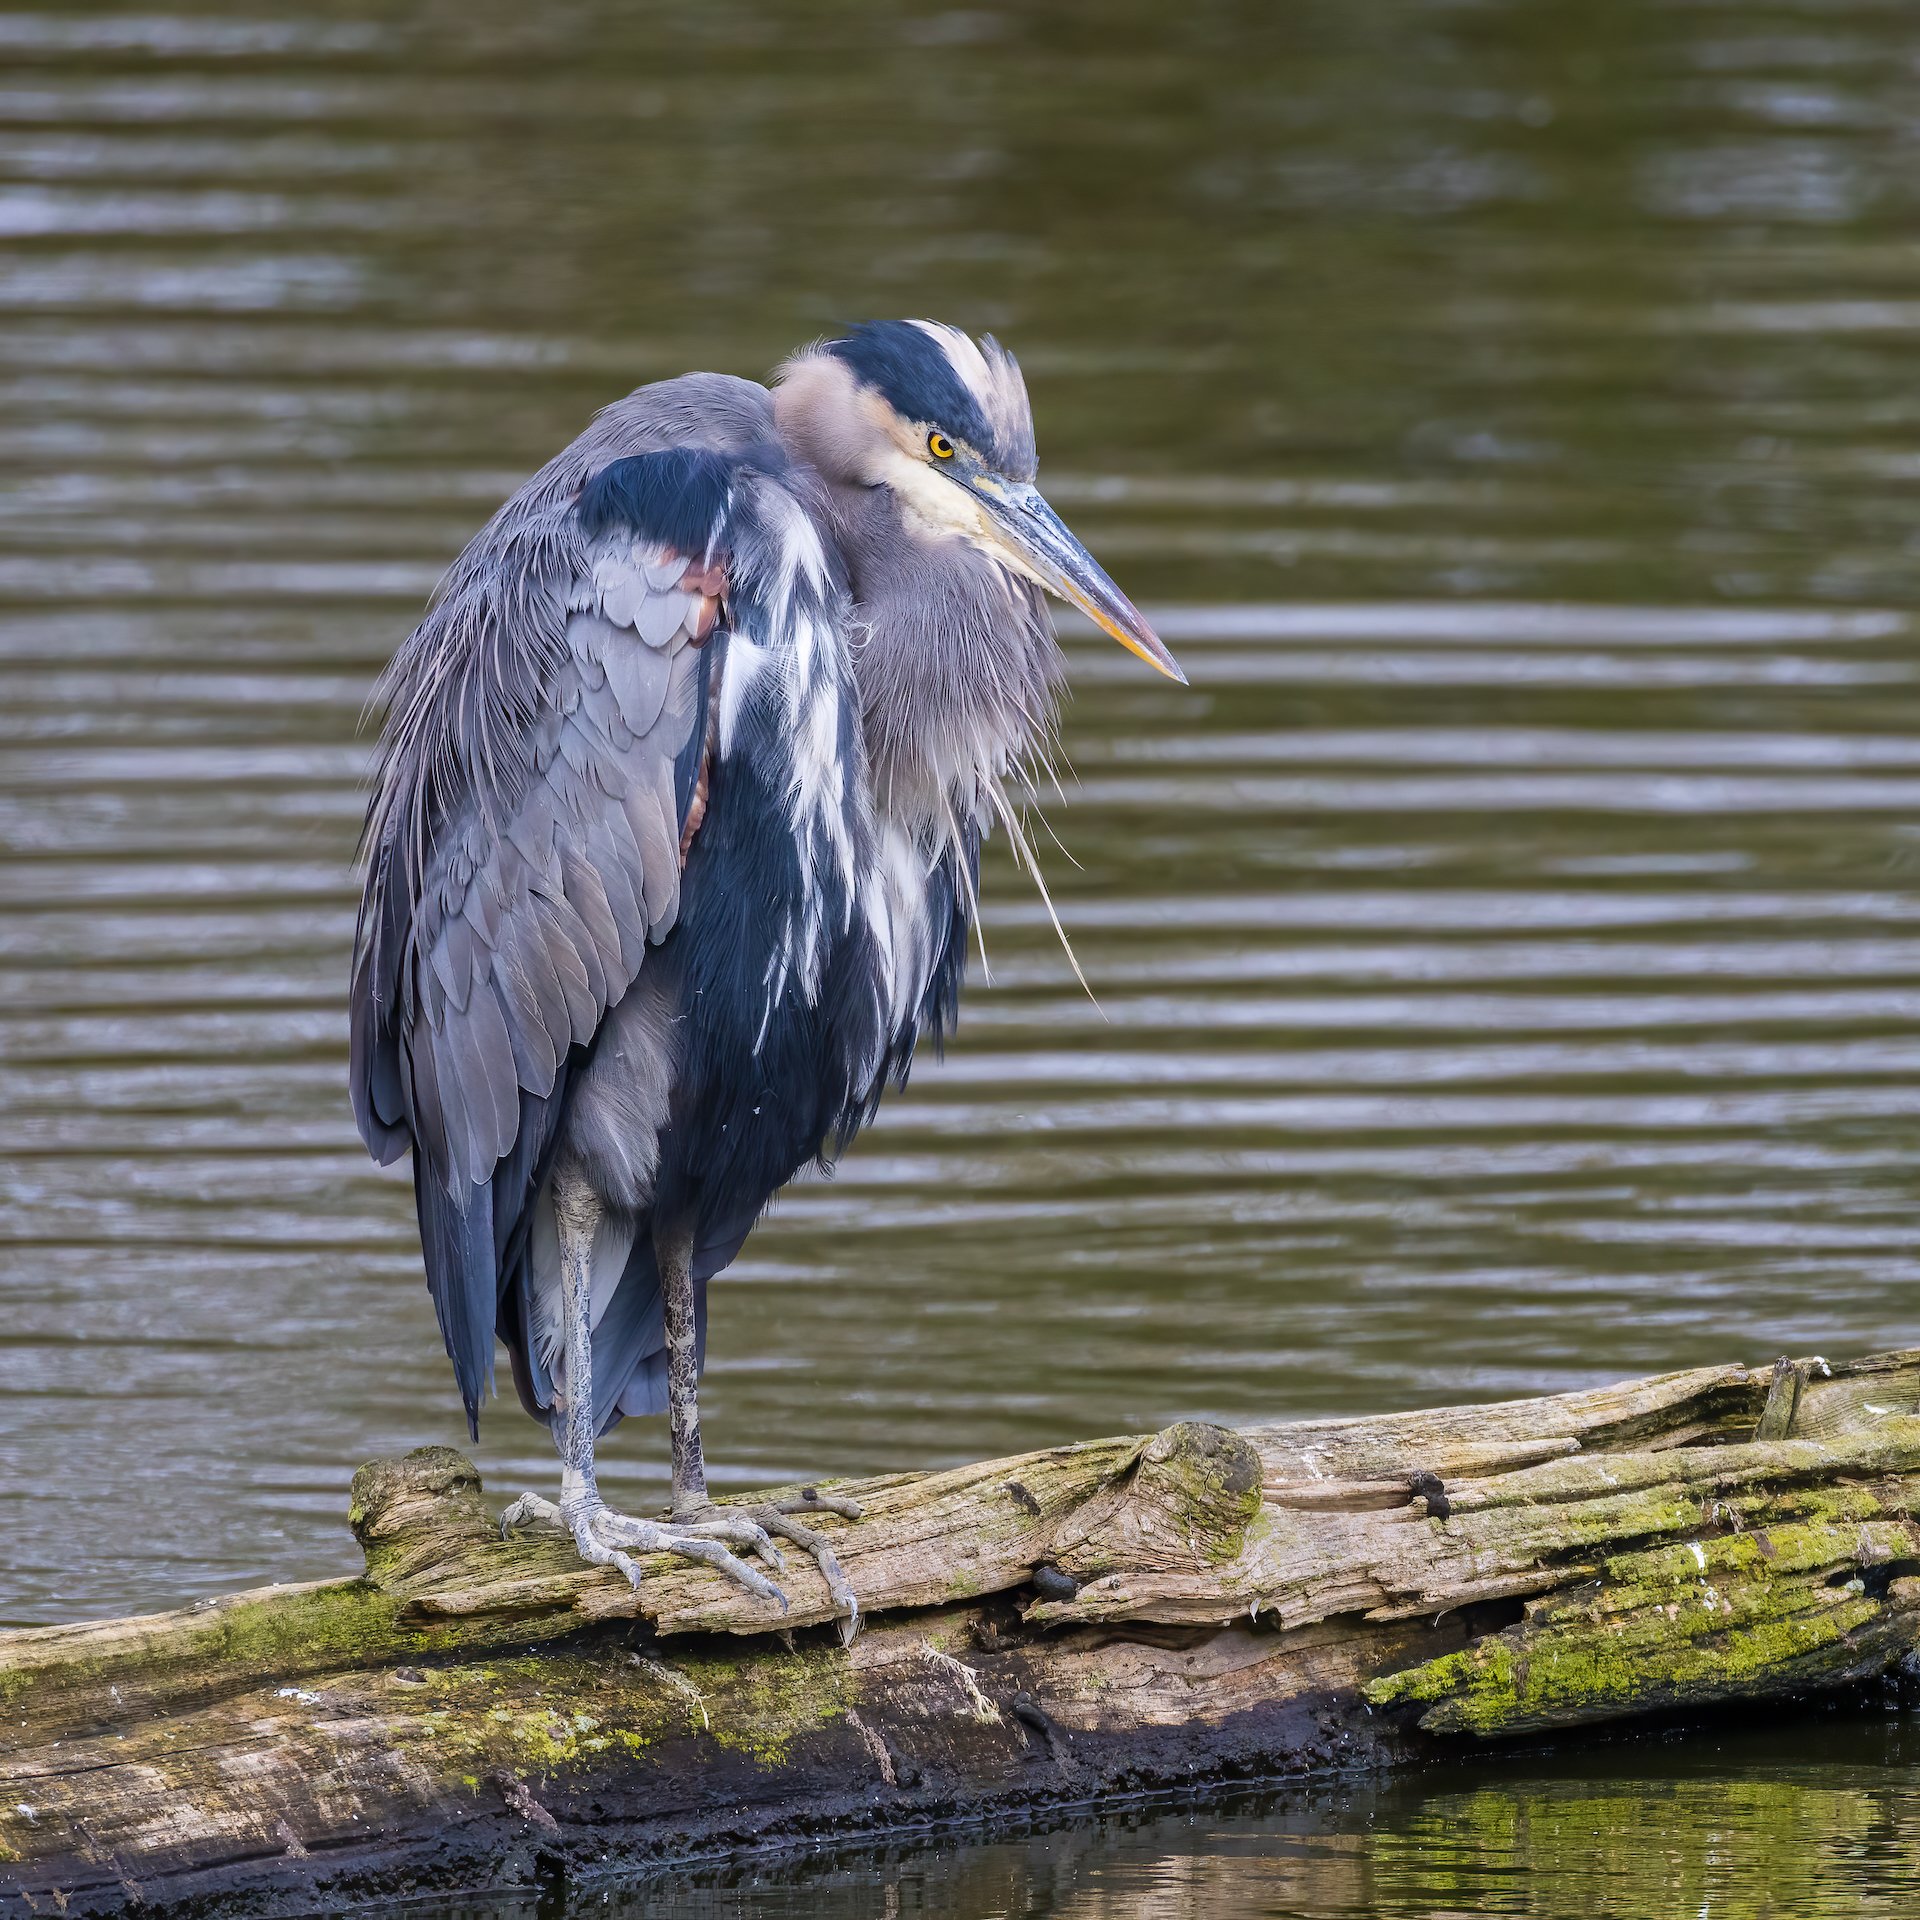  There were a huge number of herons out today. This was the closest/best posed.  